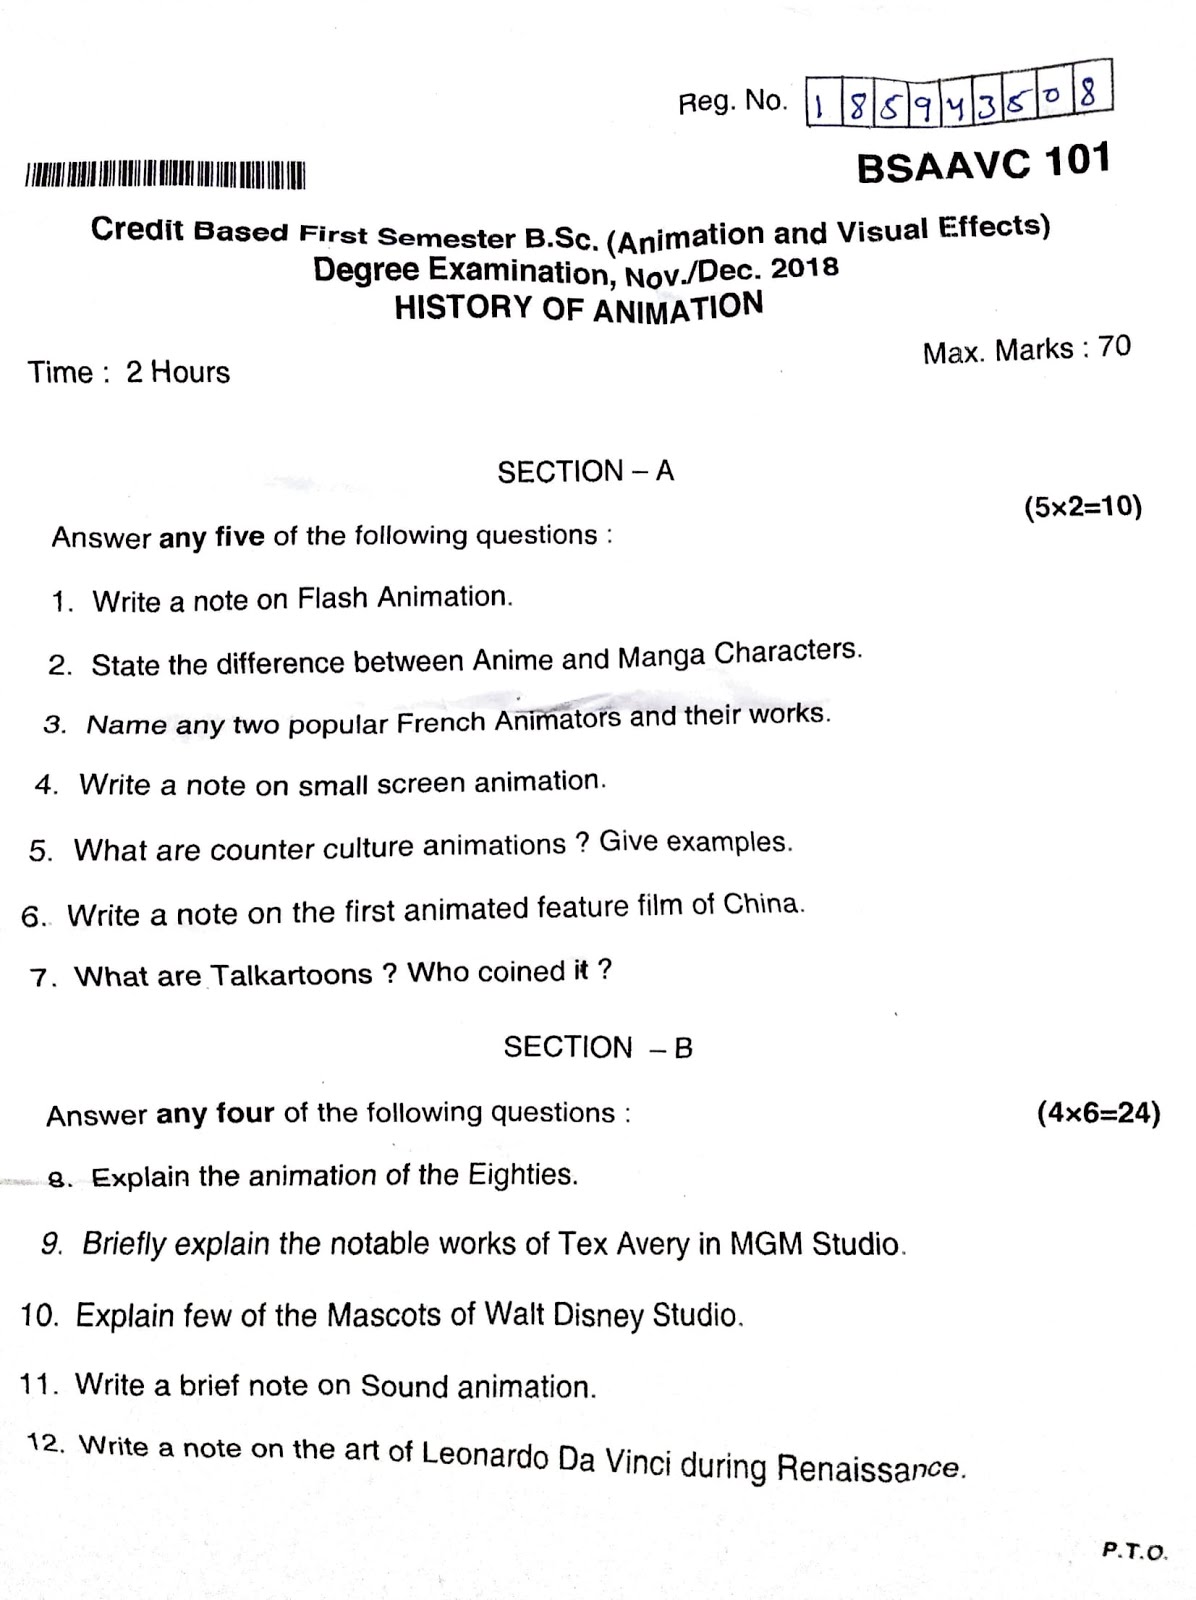 History of animation( animation and vfx) question paper